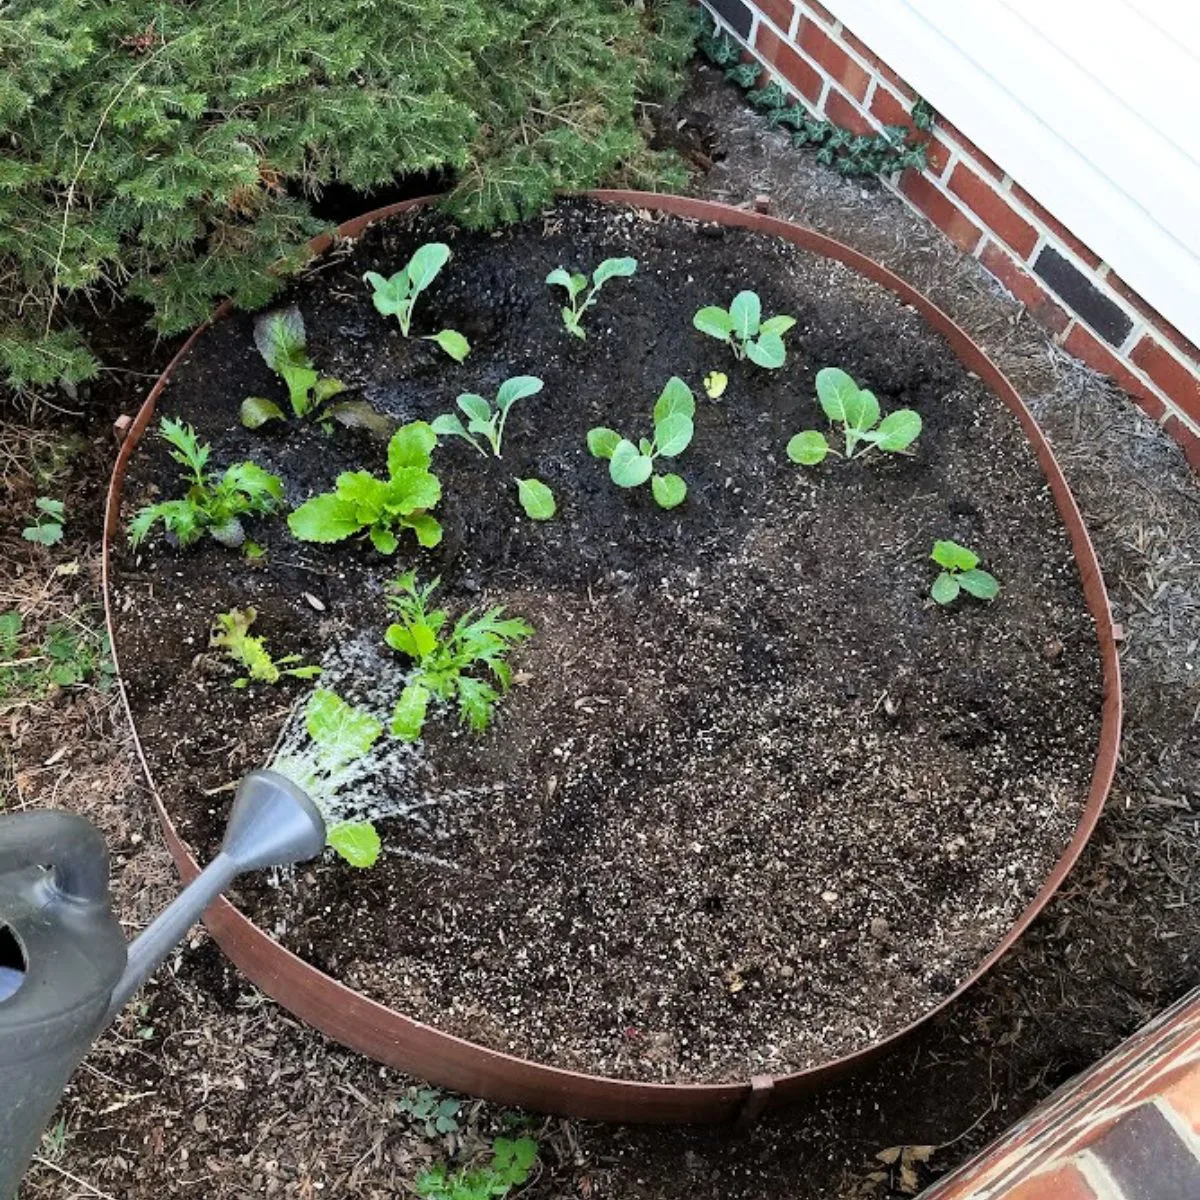 watering our front yard vegetable garden bed.